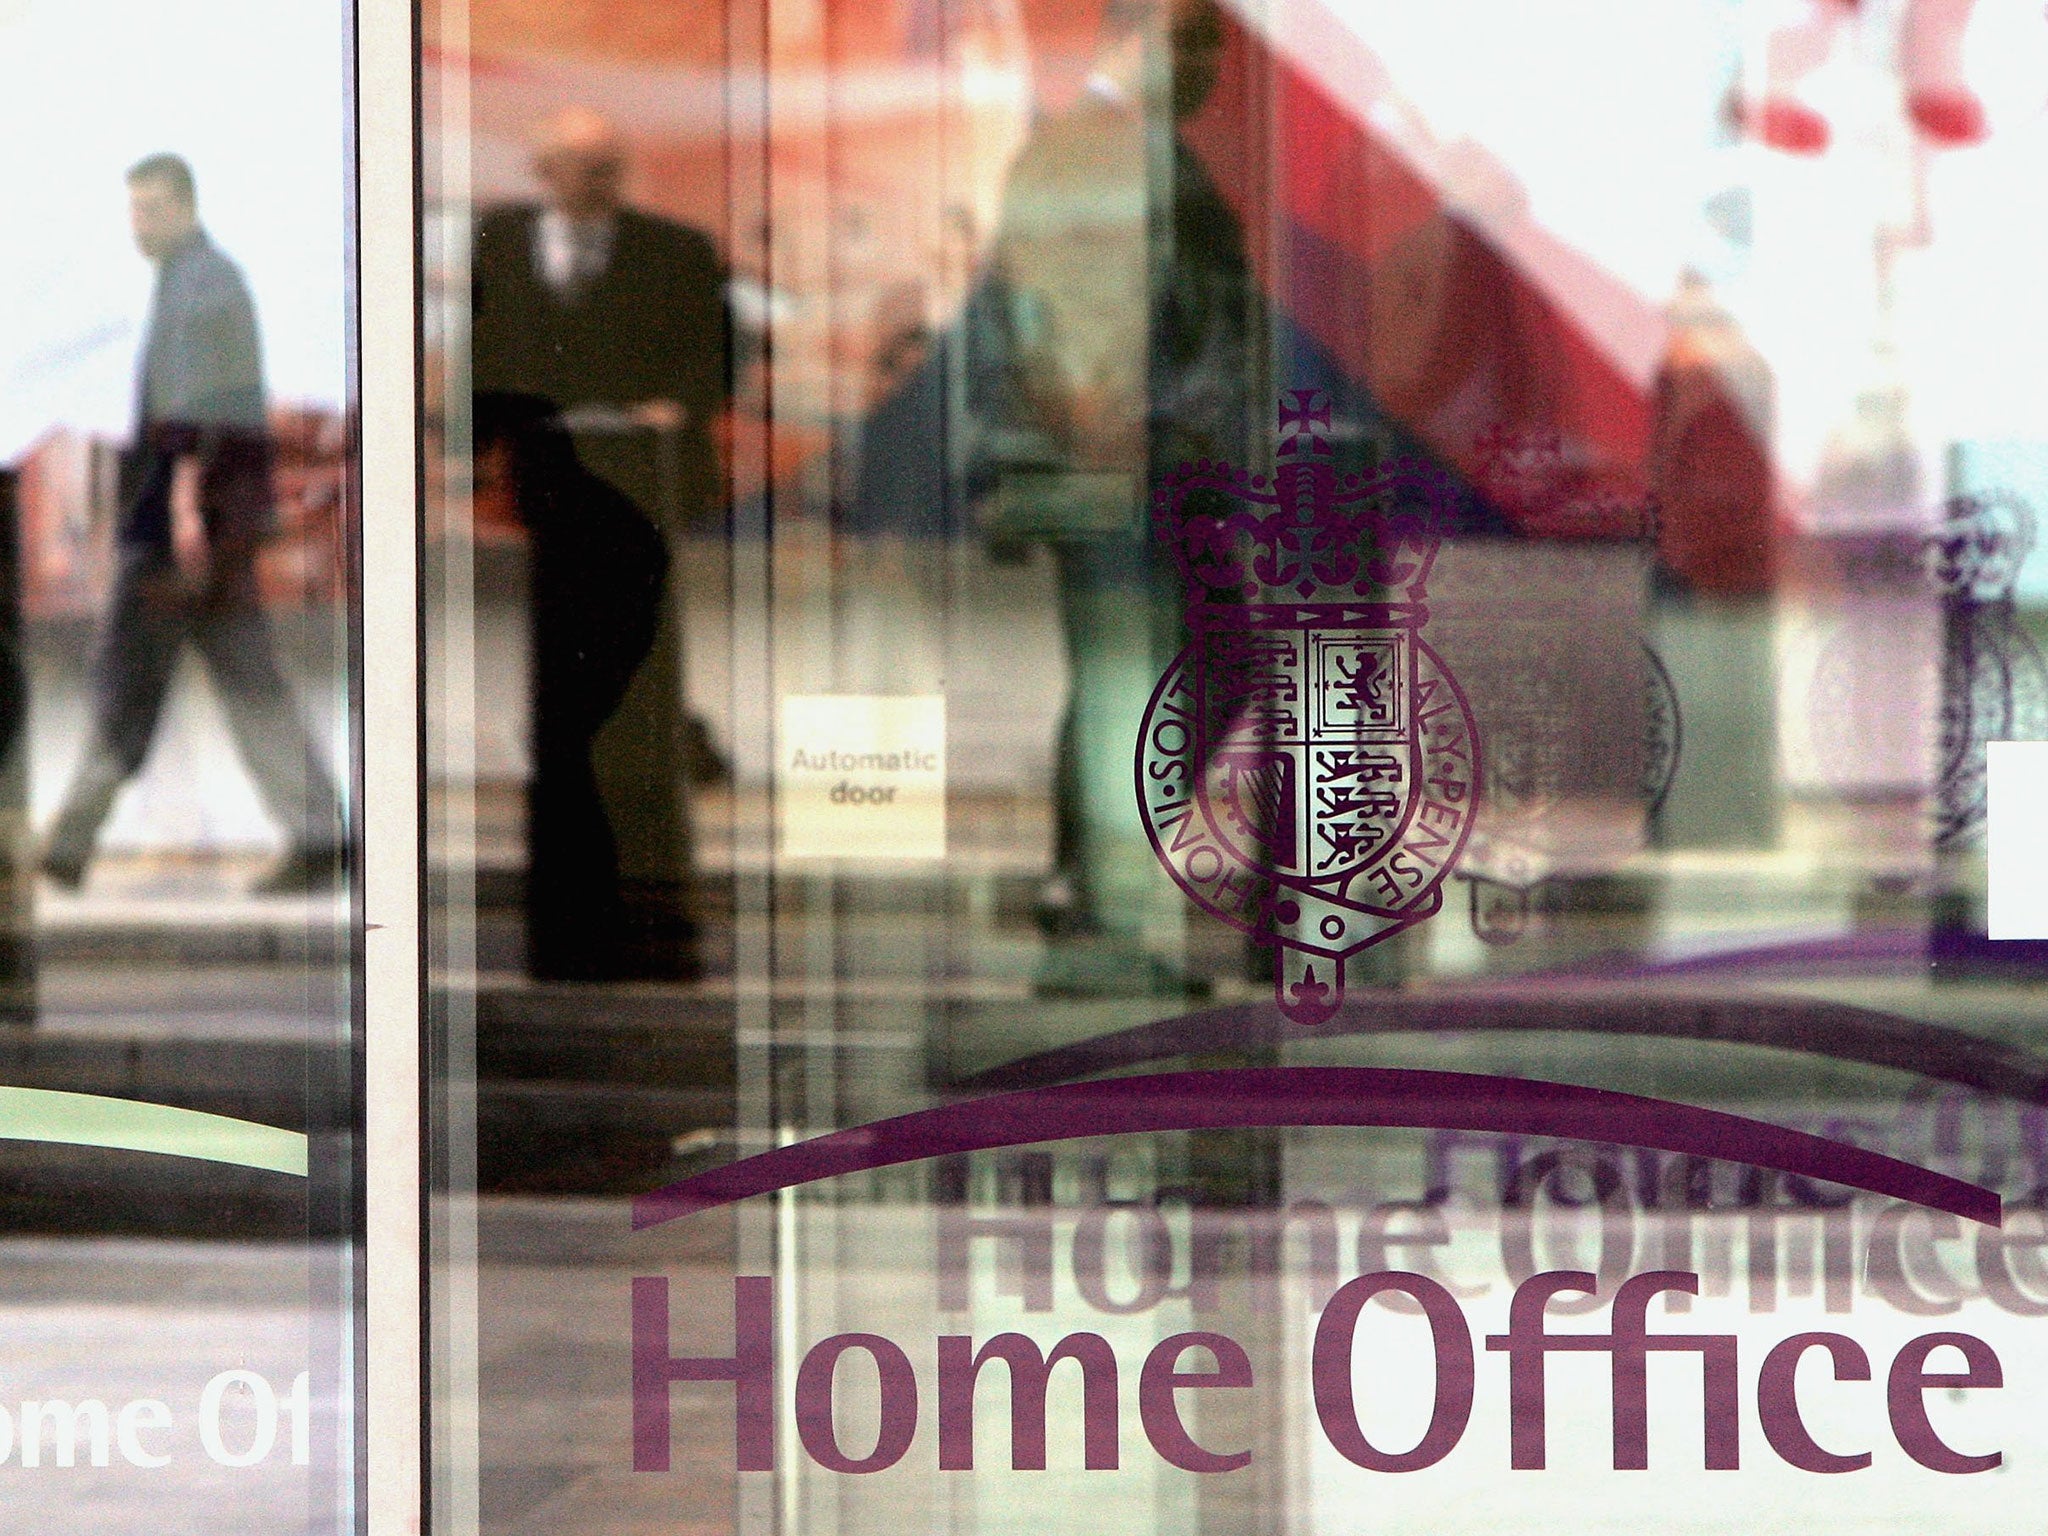 The Public Accounts Committee said the Home Office was relying on a ‘disturbingly weak’ evidence